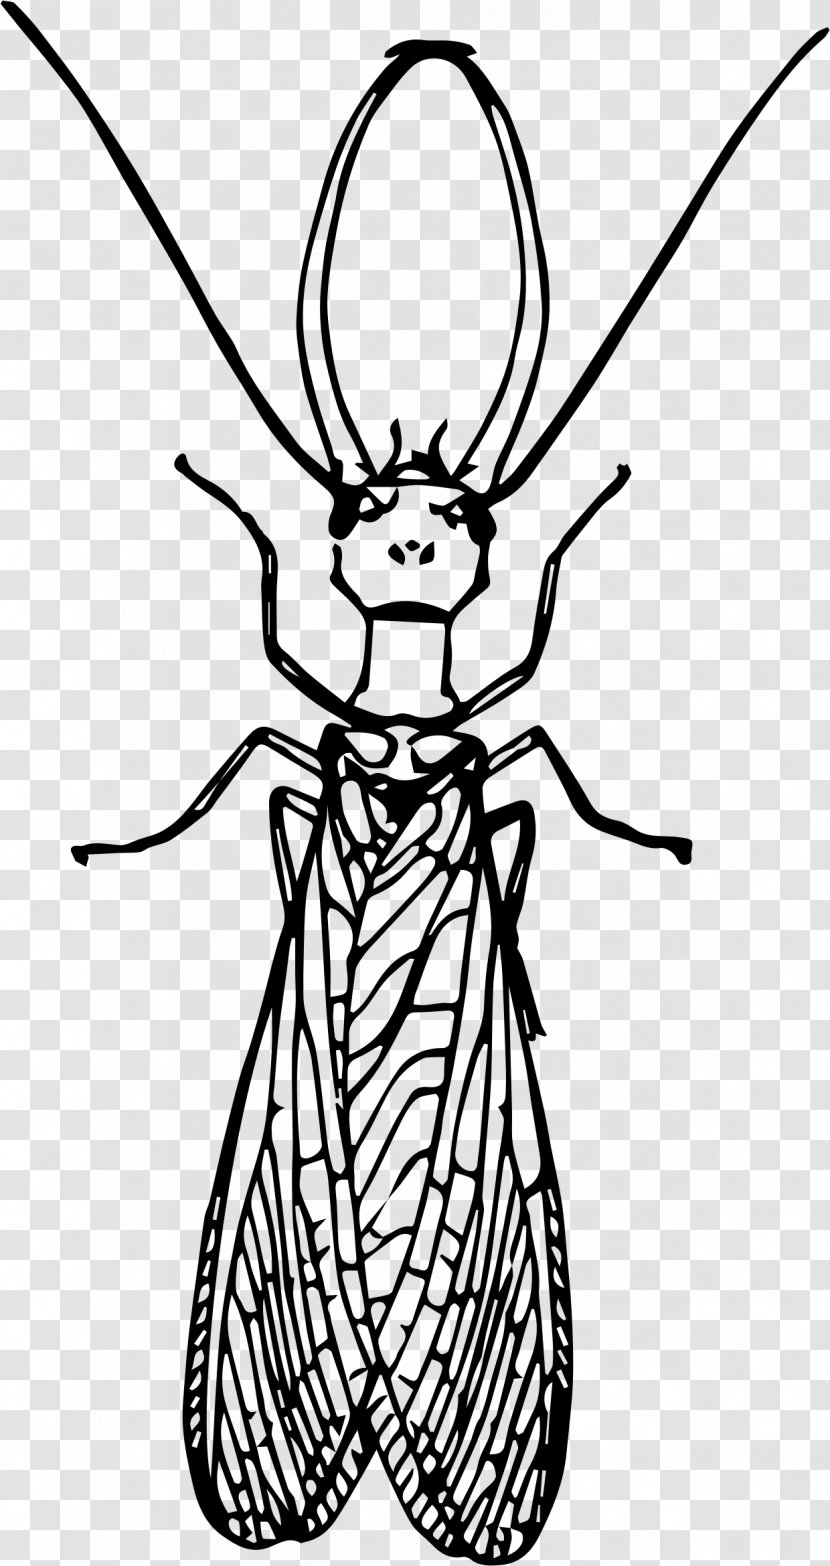 Insect Dobsonflies Drawing Clip Art - Image File Formats Transparent PNG